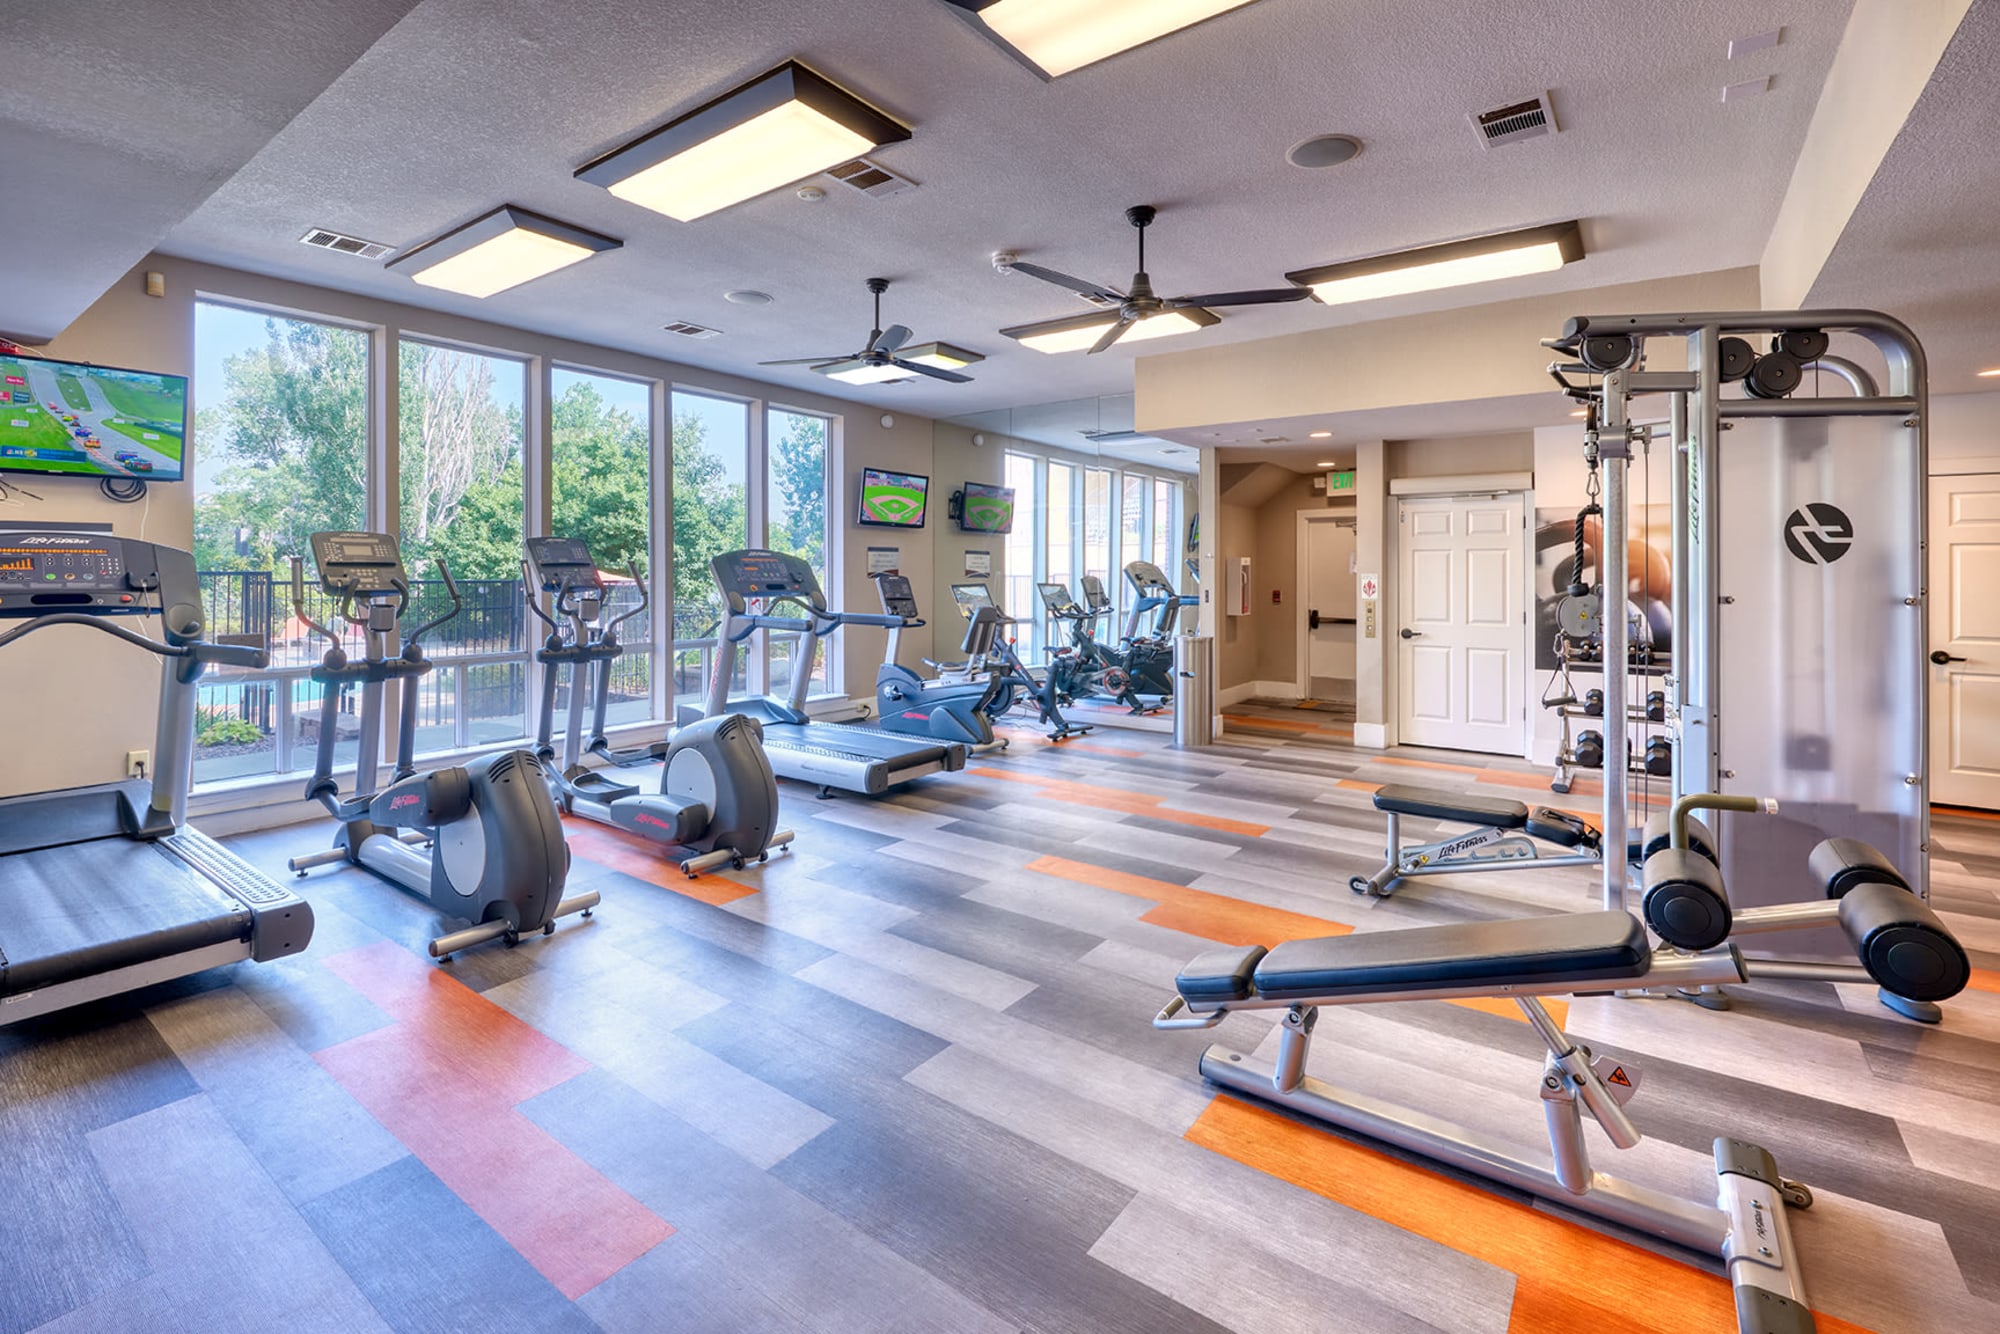 The newly renovated fitness center at The Crossings at Bear Creek Apartments in Lakewood, Colorado